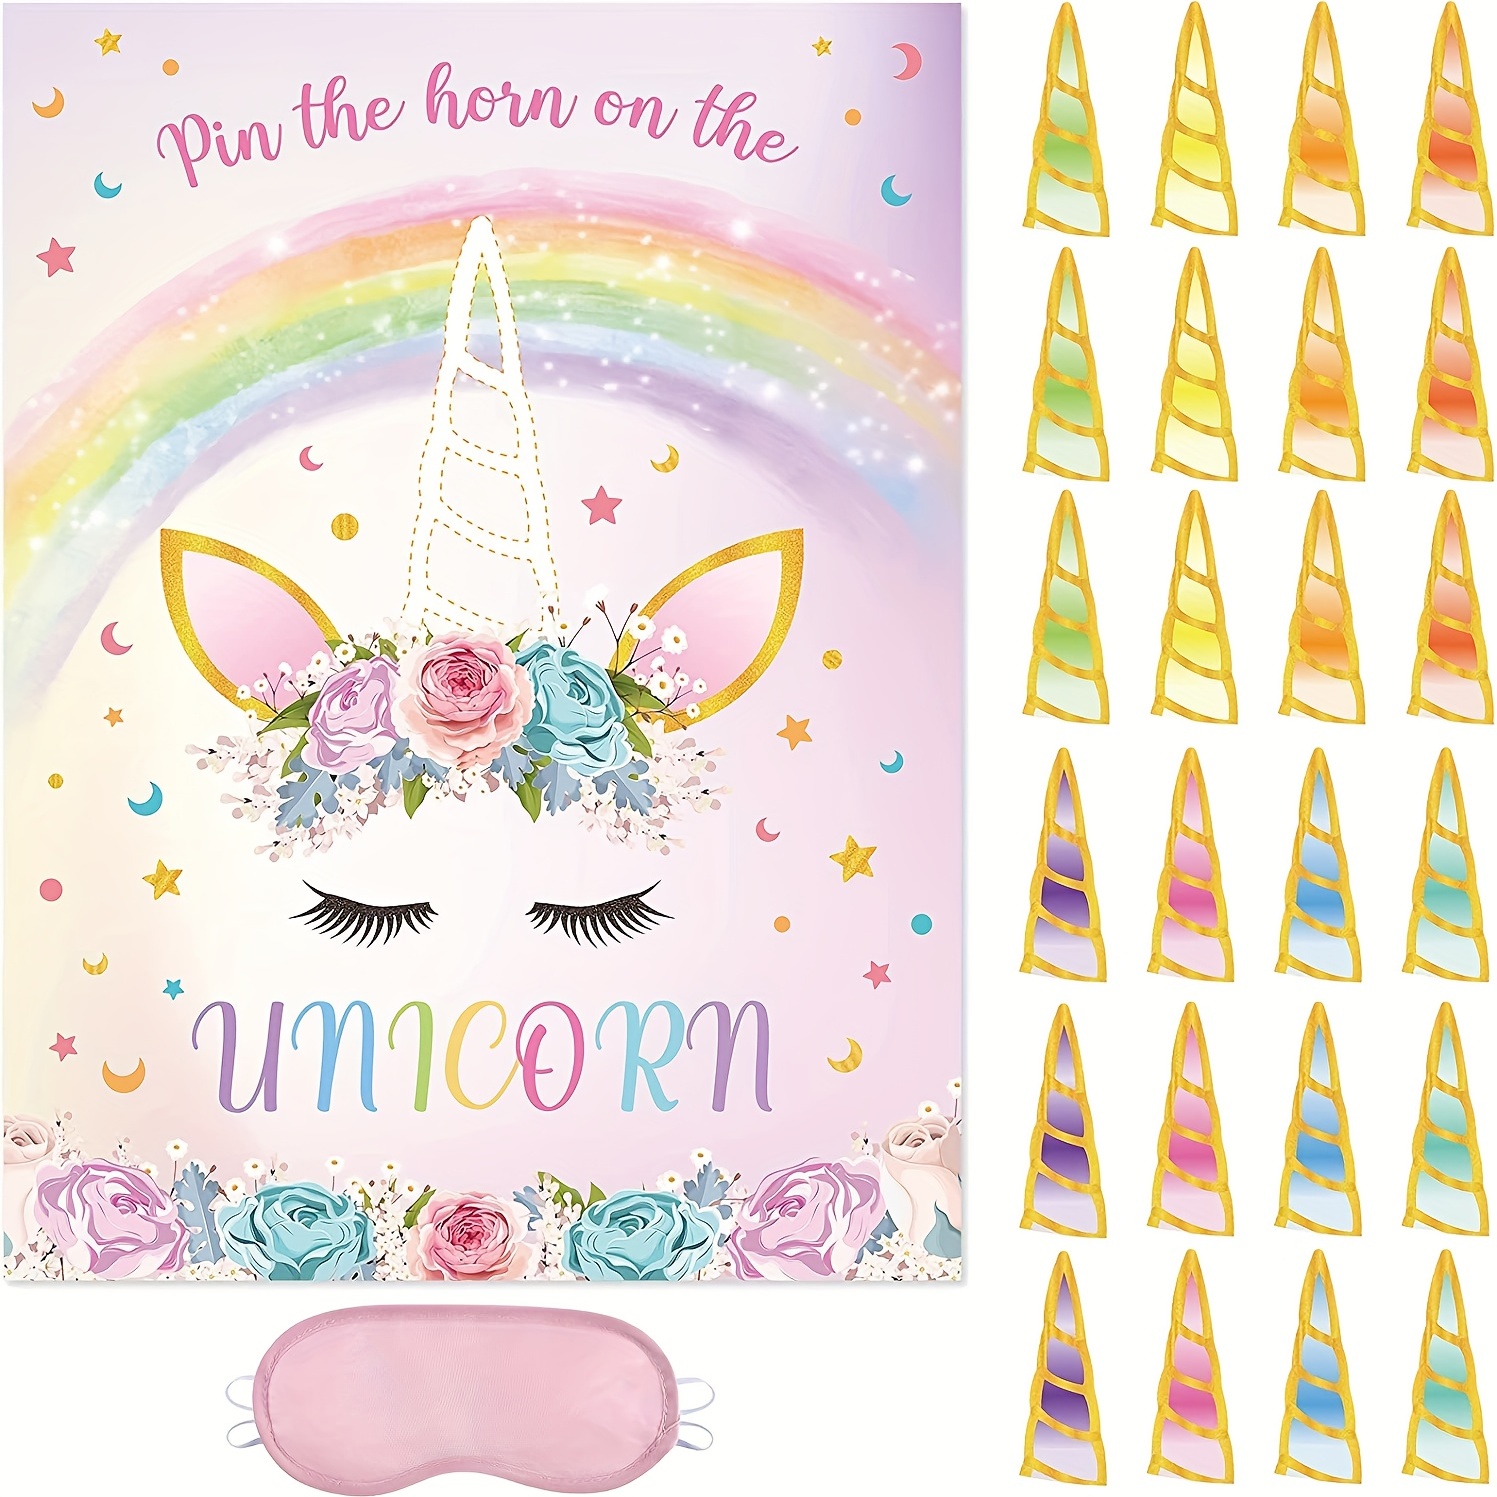 Pin on Decorative Printable Stickers